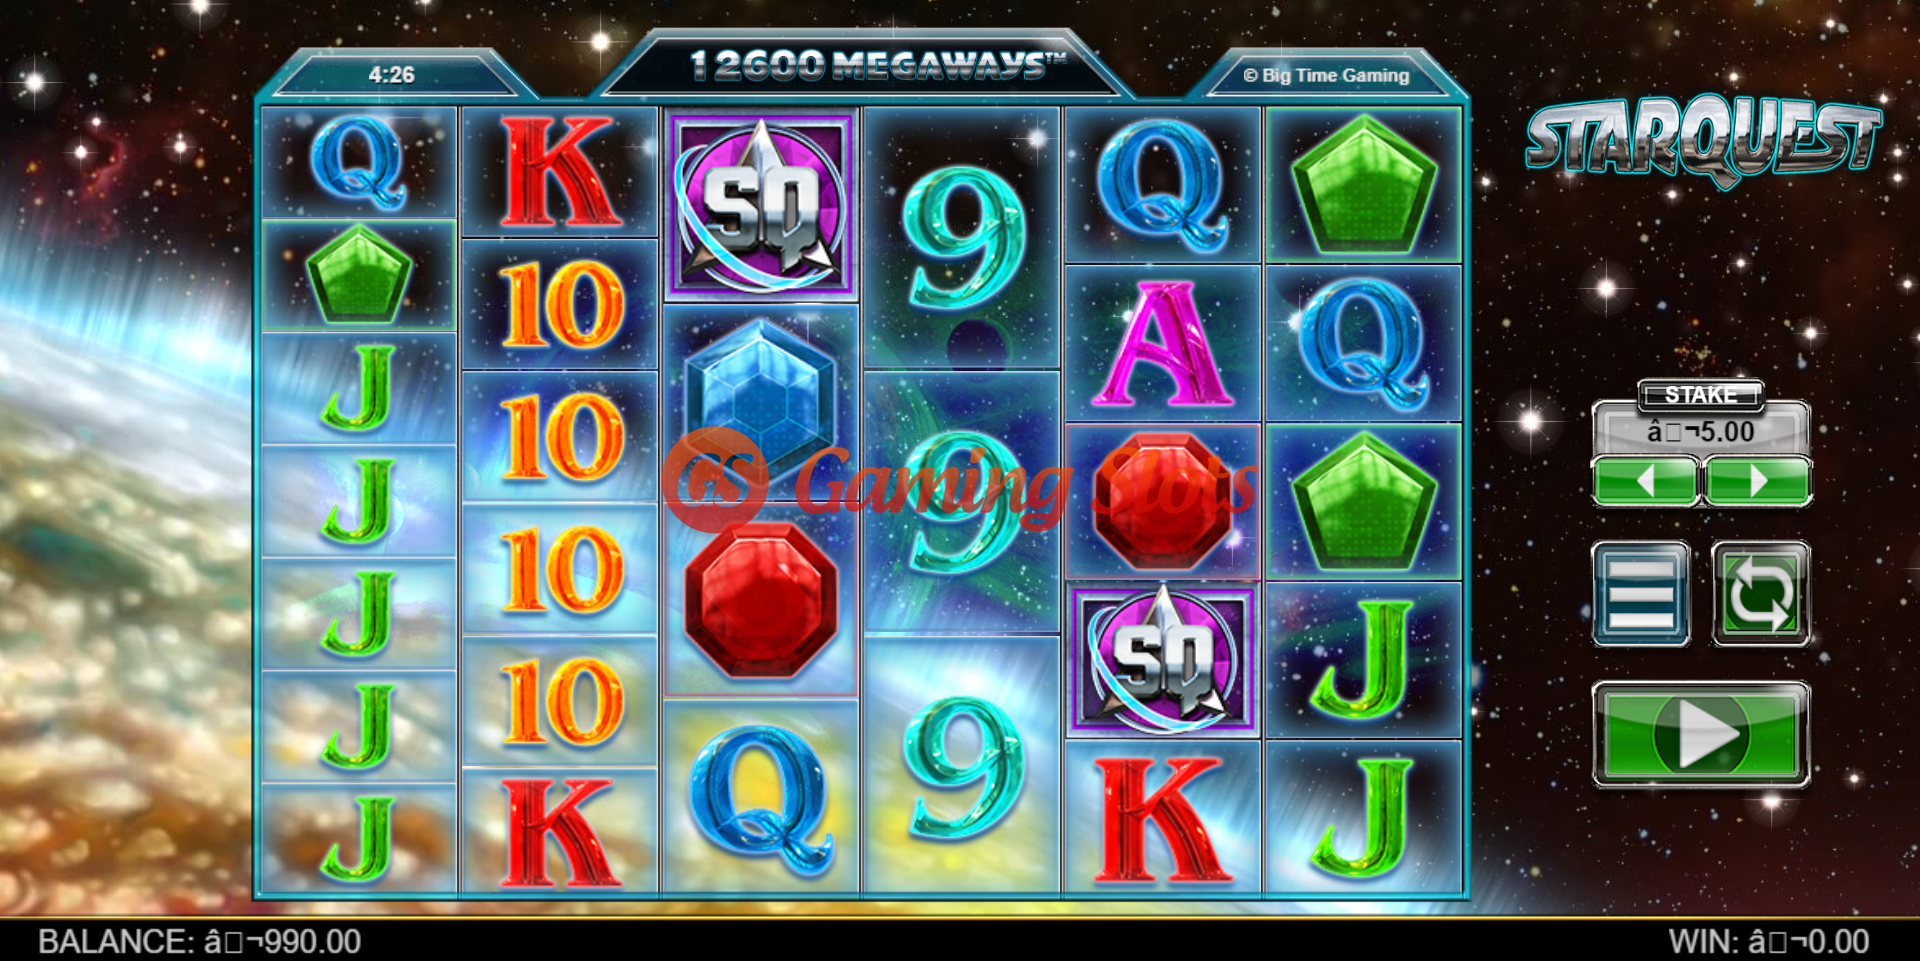 Base Game for Starquest slot from Big Time Gaming